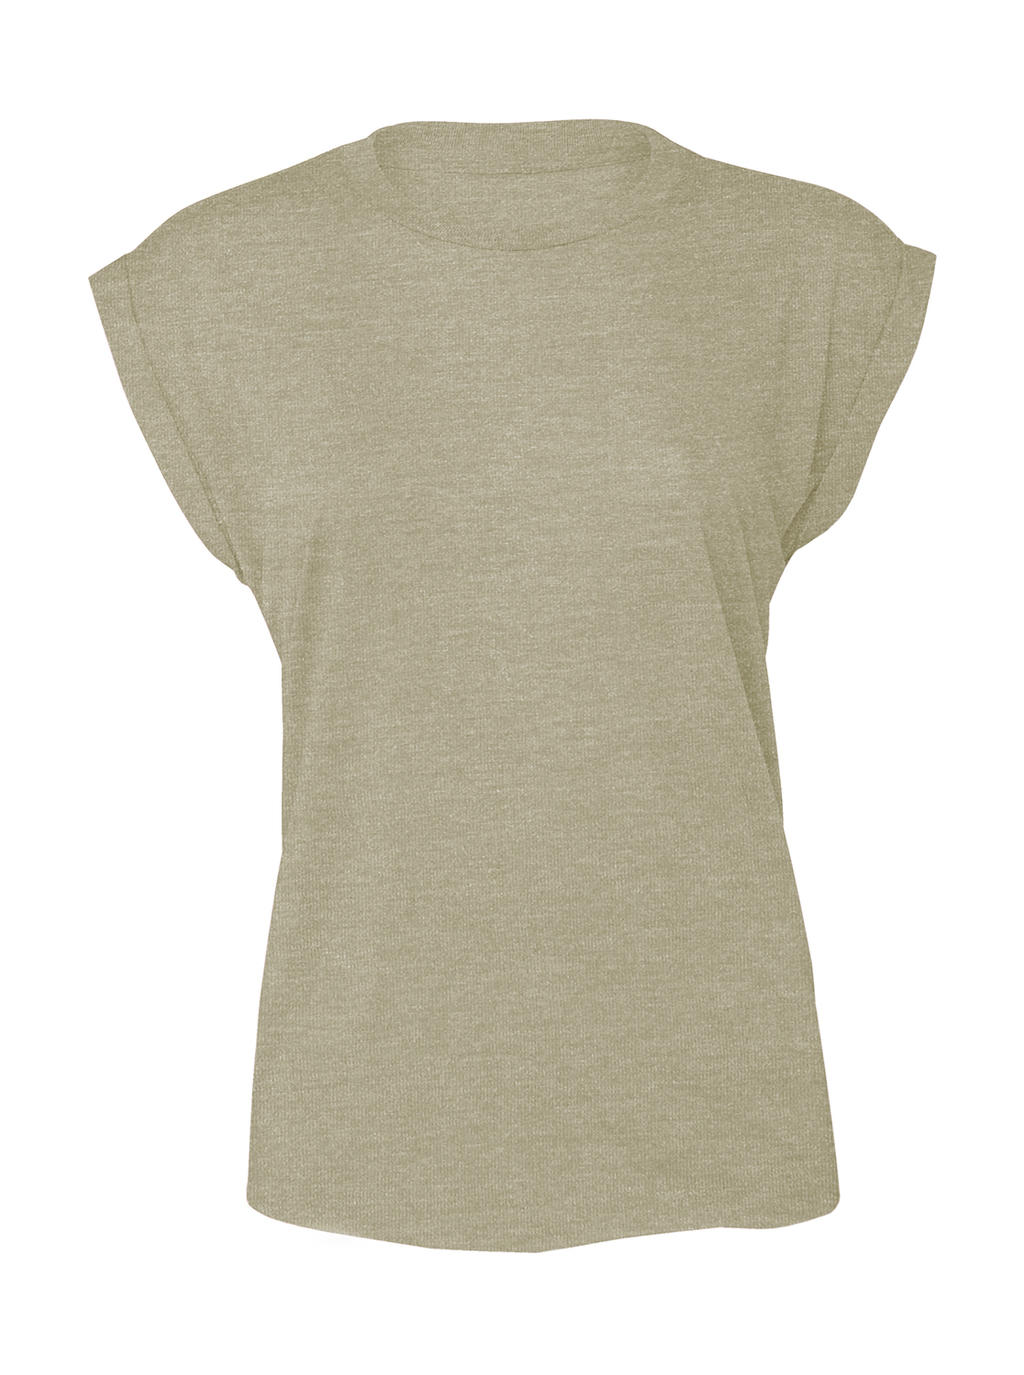  Womens Flowy Muscle Tee Rolled Cuff in Farbe Heather Stone